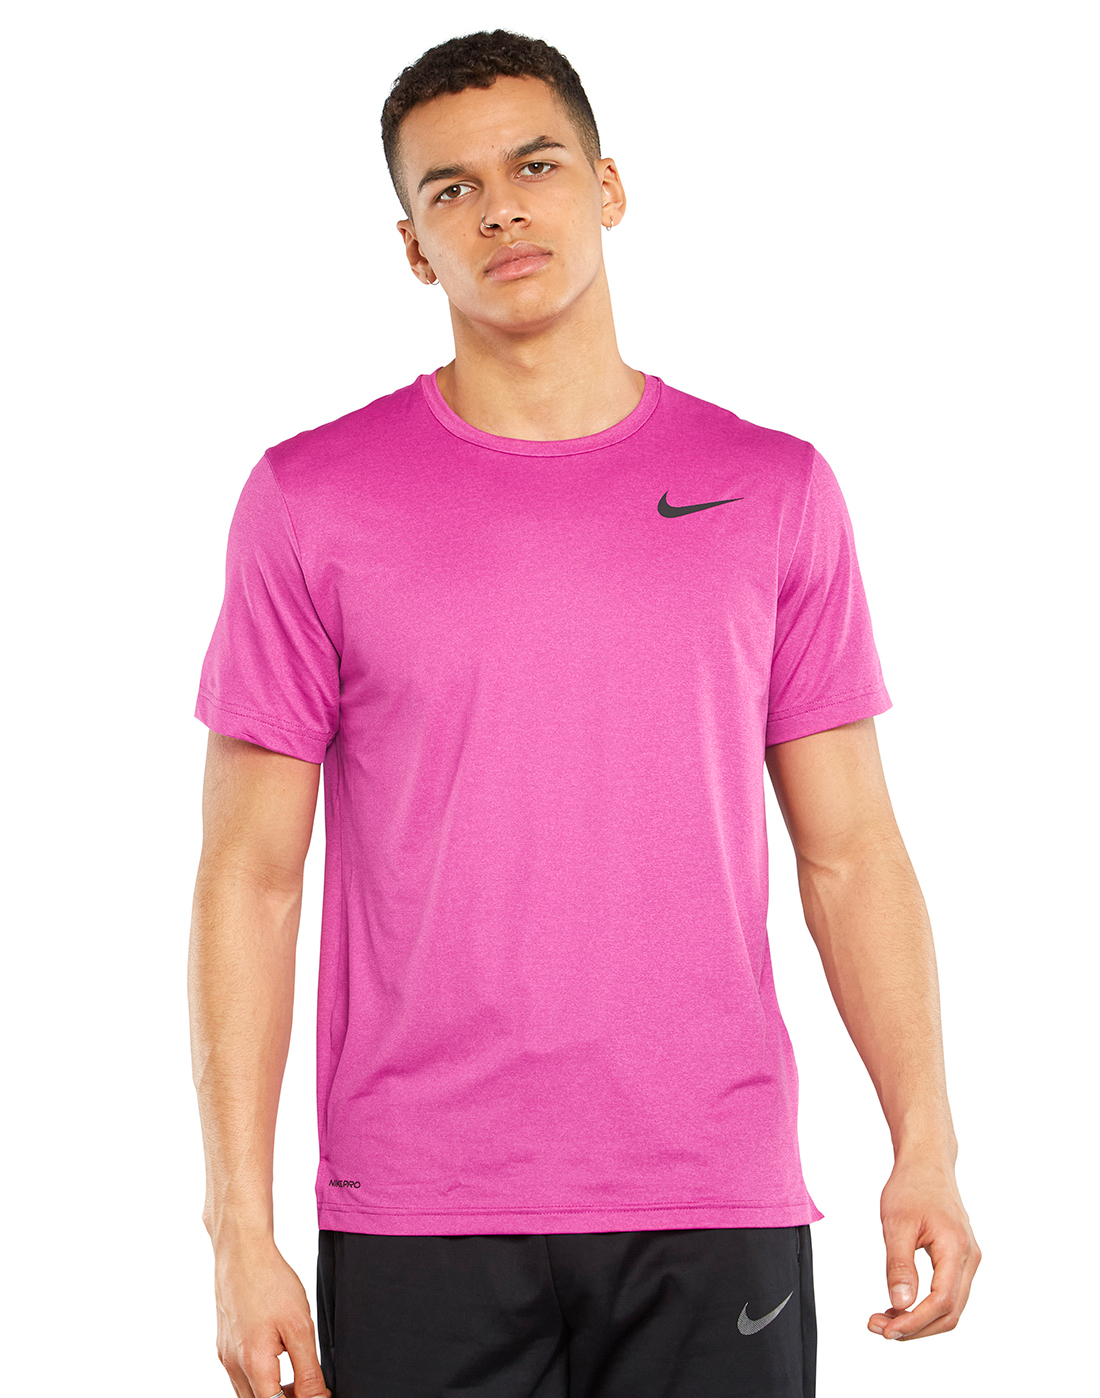 Nike Mens Hyper Dry T-shirt - Red | Life Style Sports IE